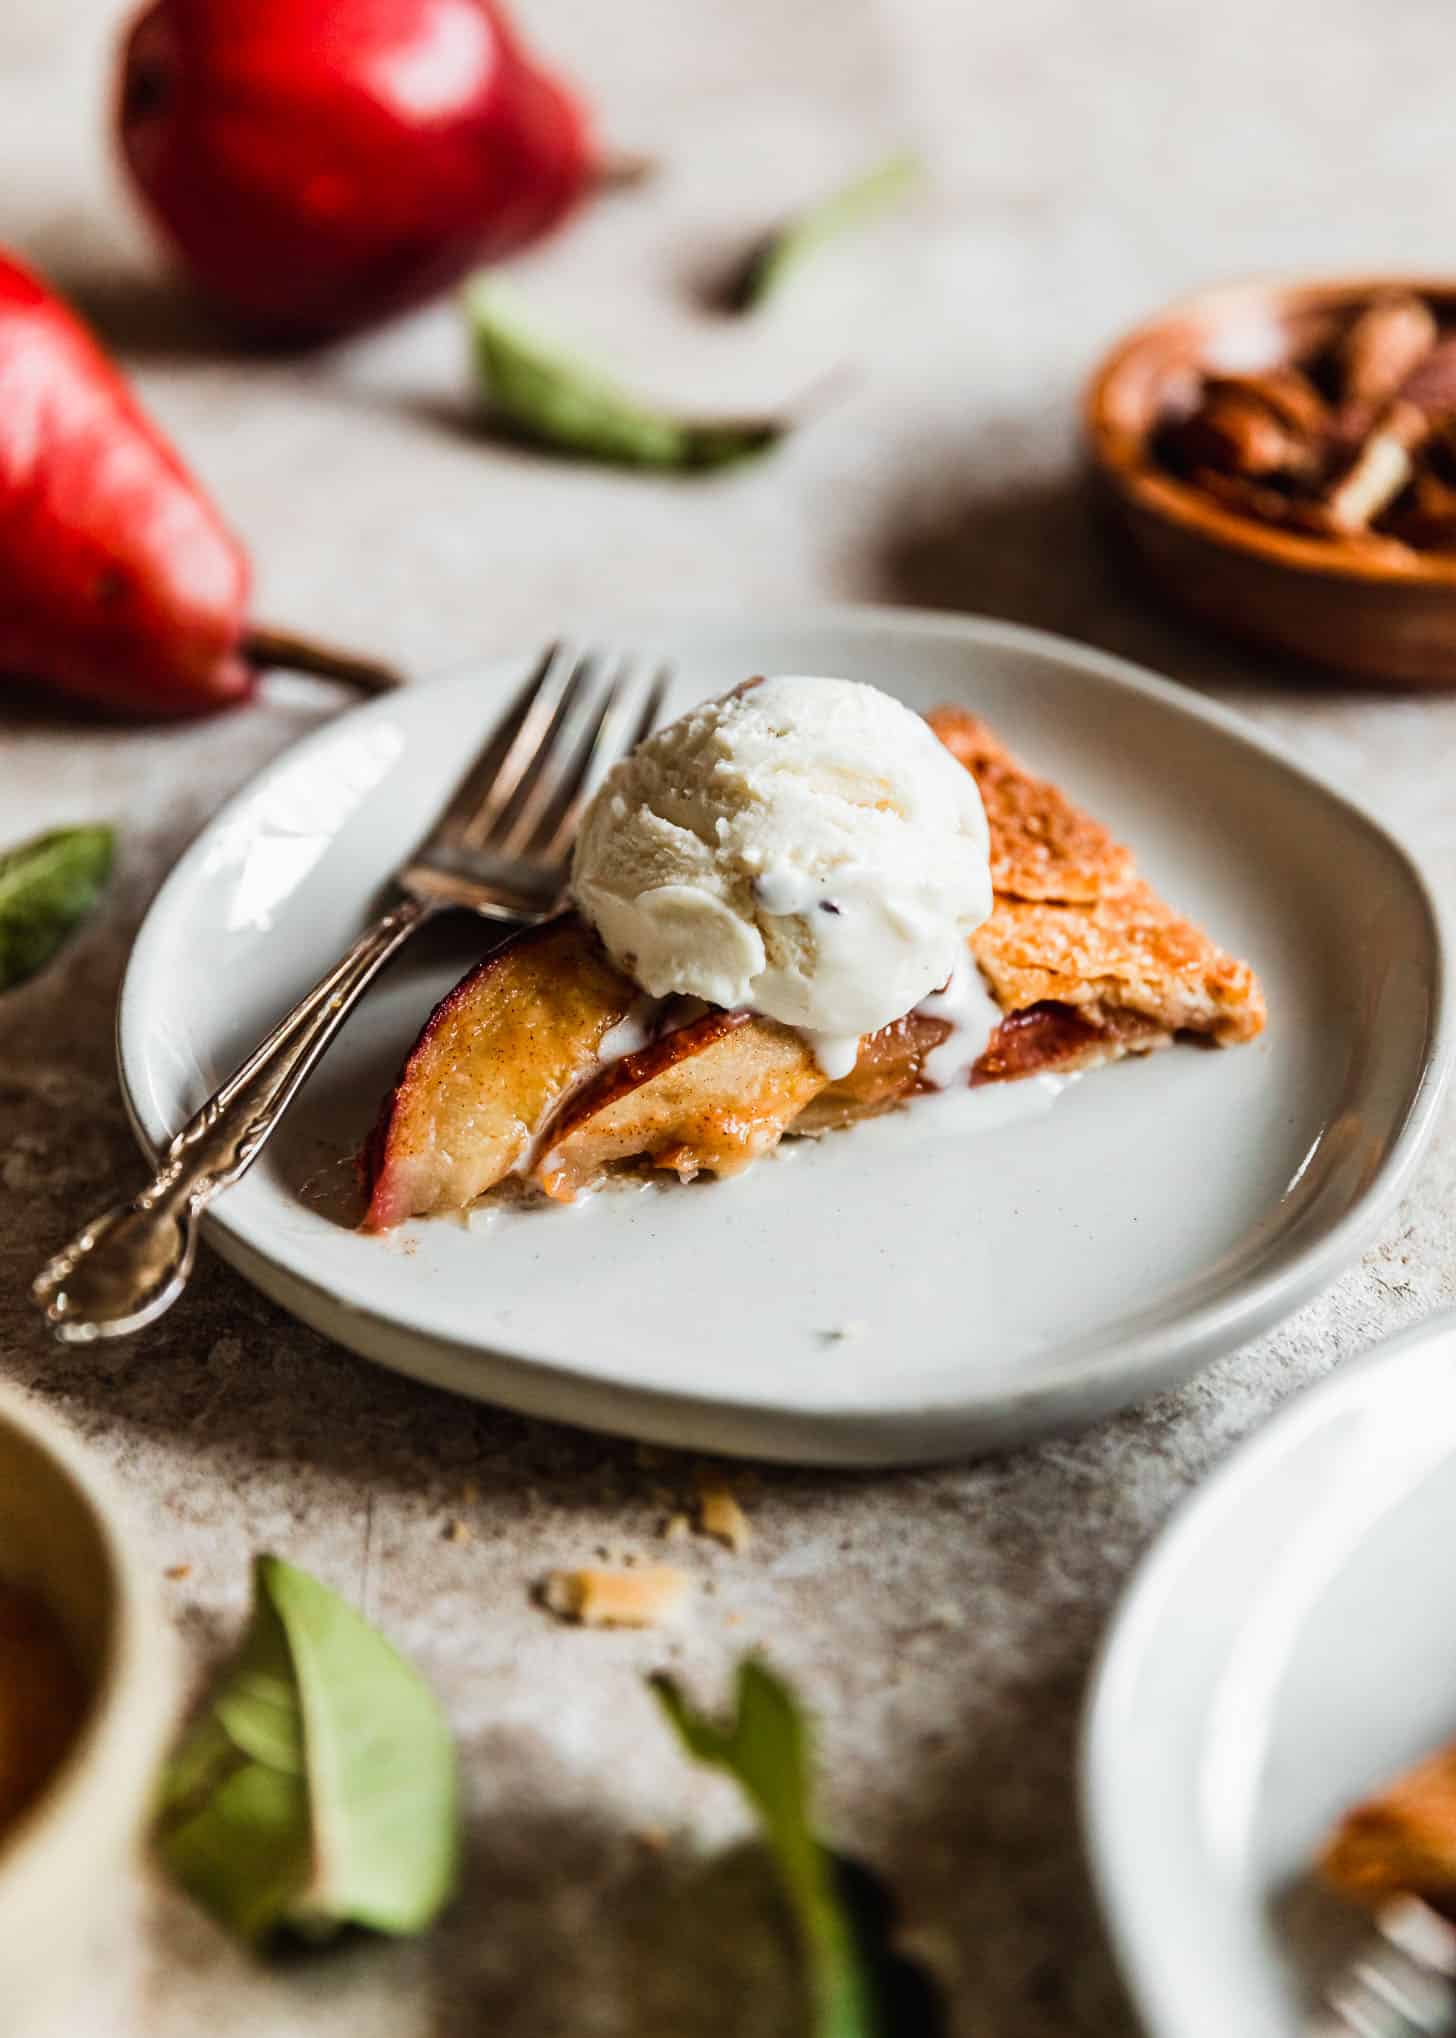 A slice of ginger pear galette with ice cream on a white plate next to red pears and leaves on a beige counter.